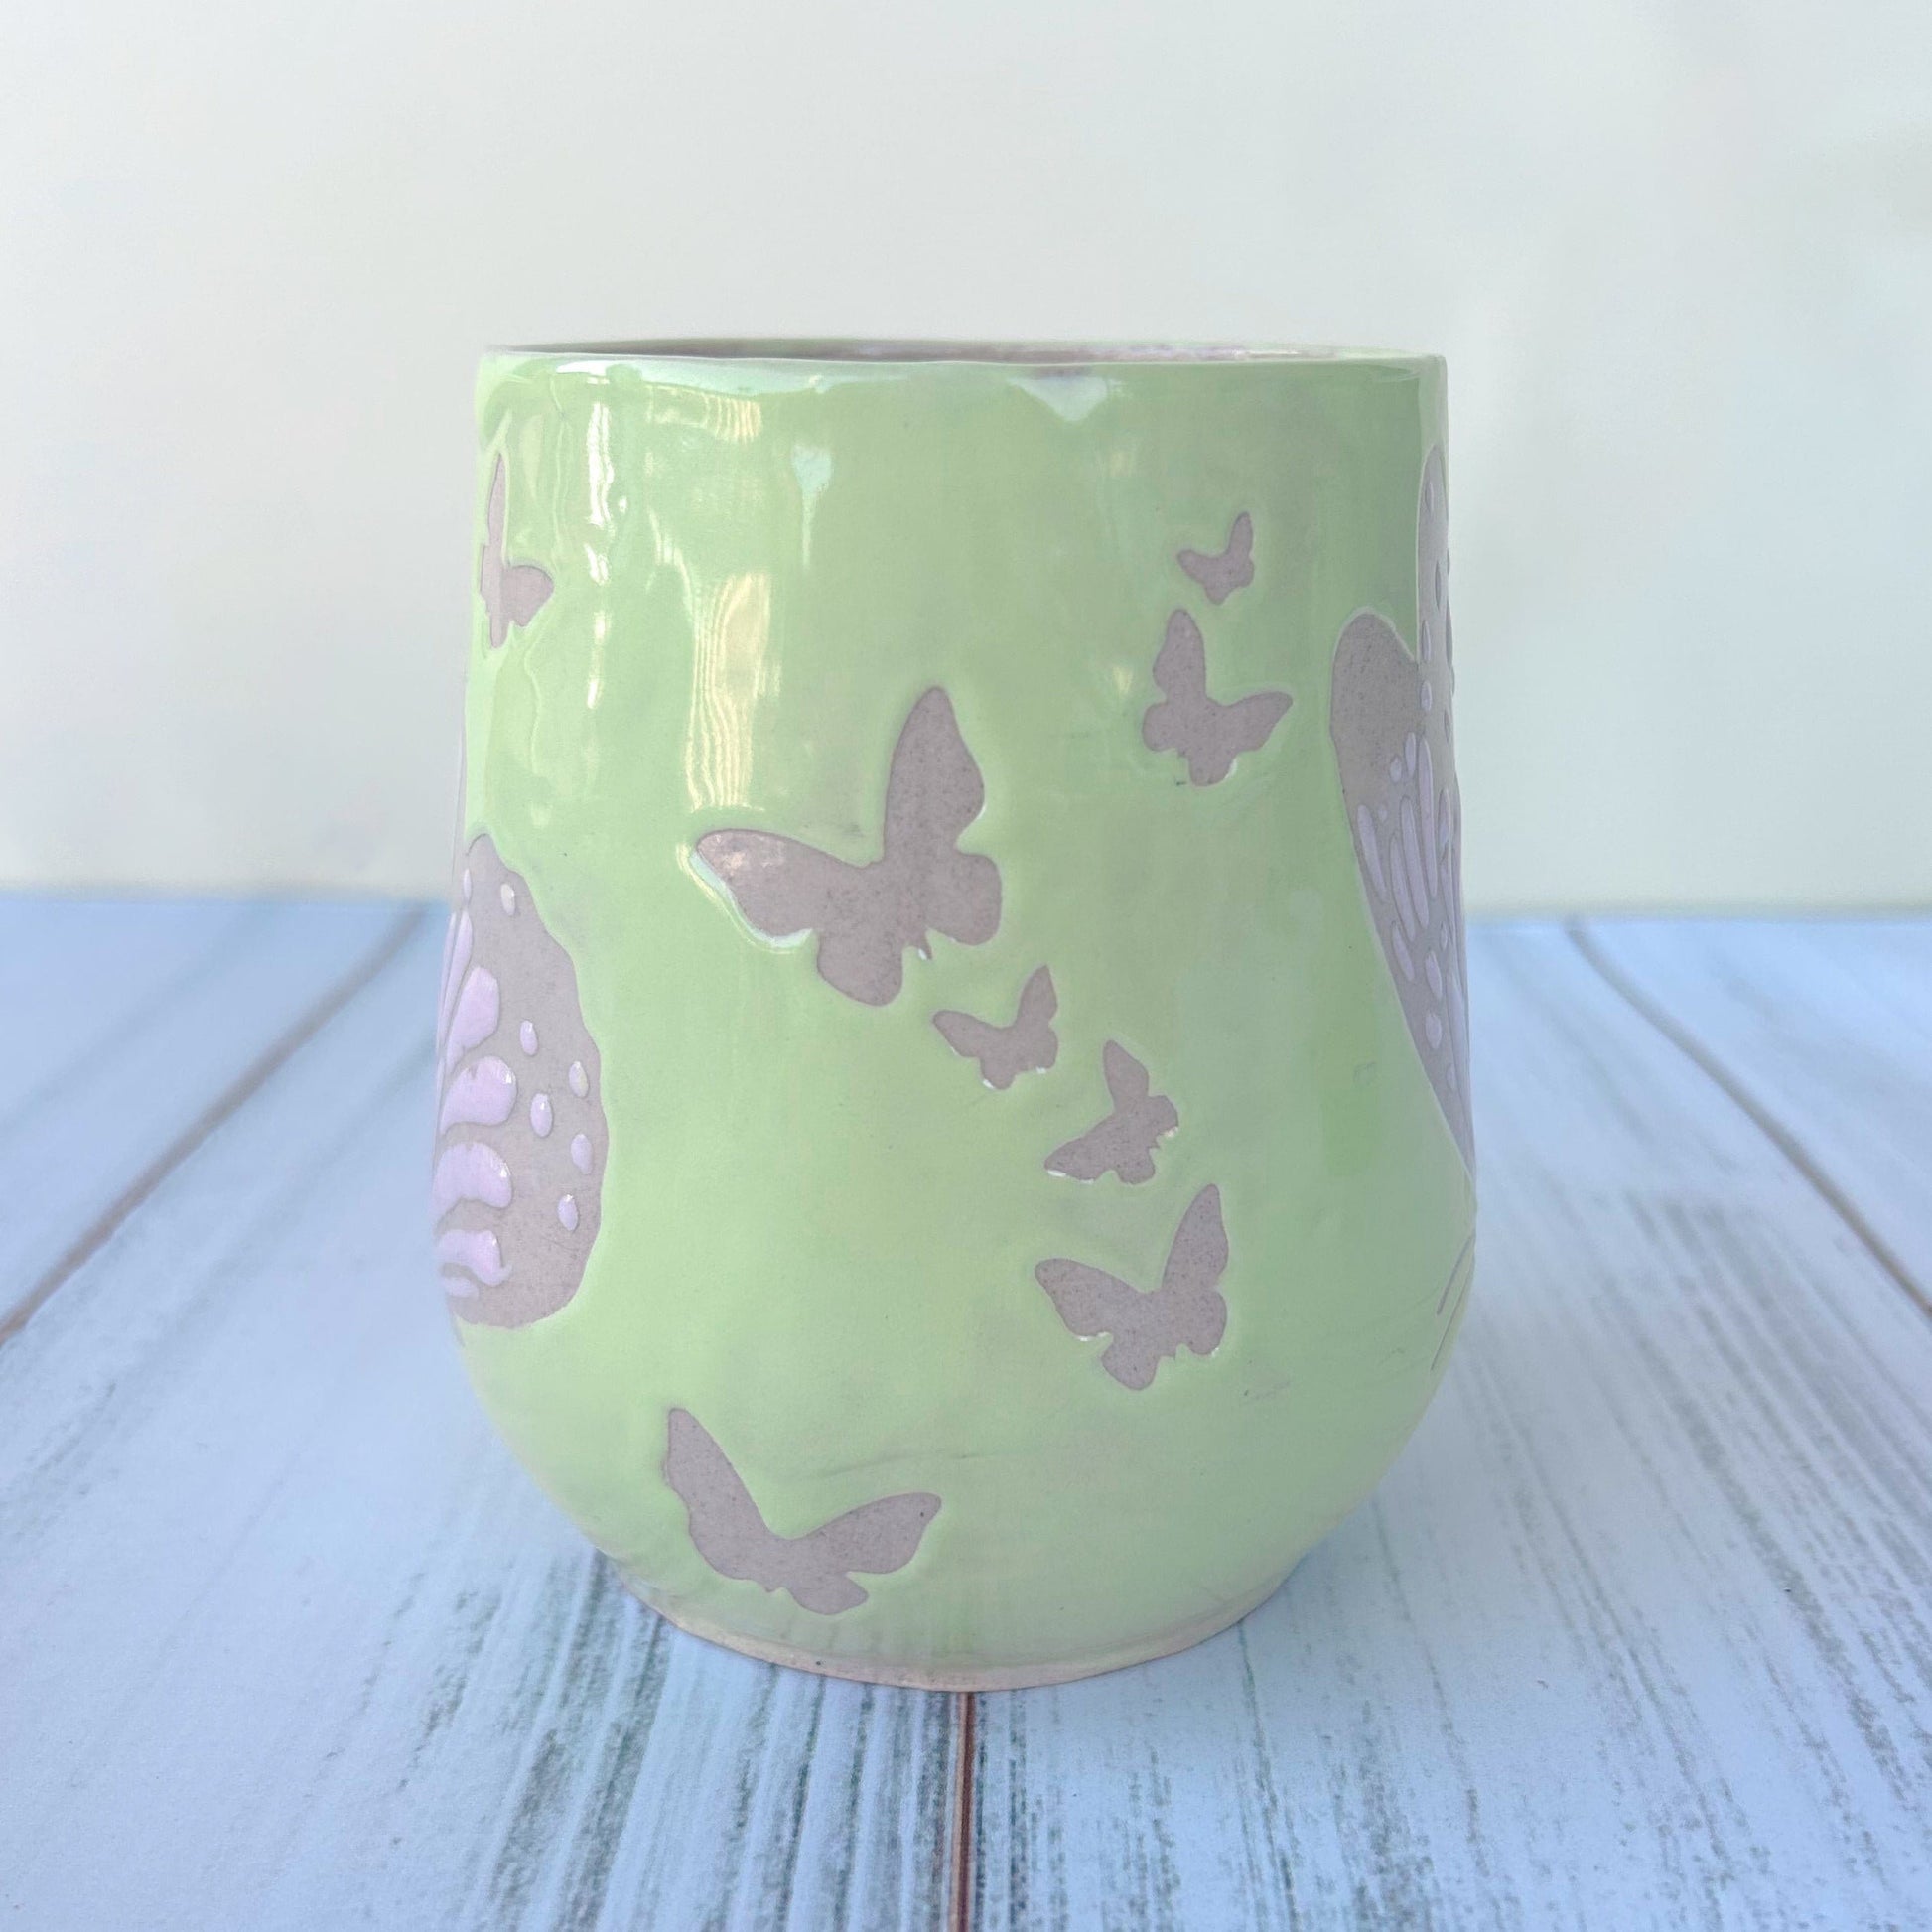 Green and Pink Monarch Butterfly Ceramic Mug